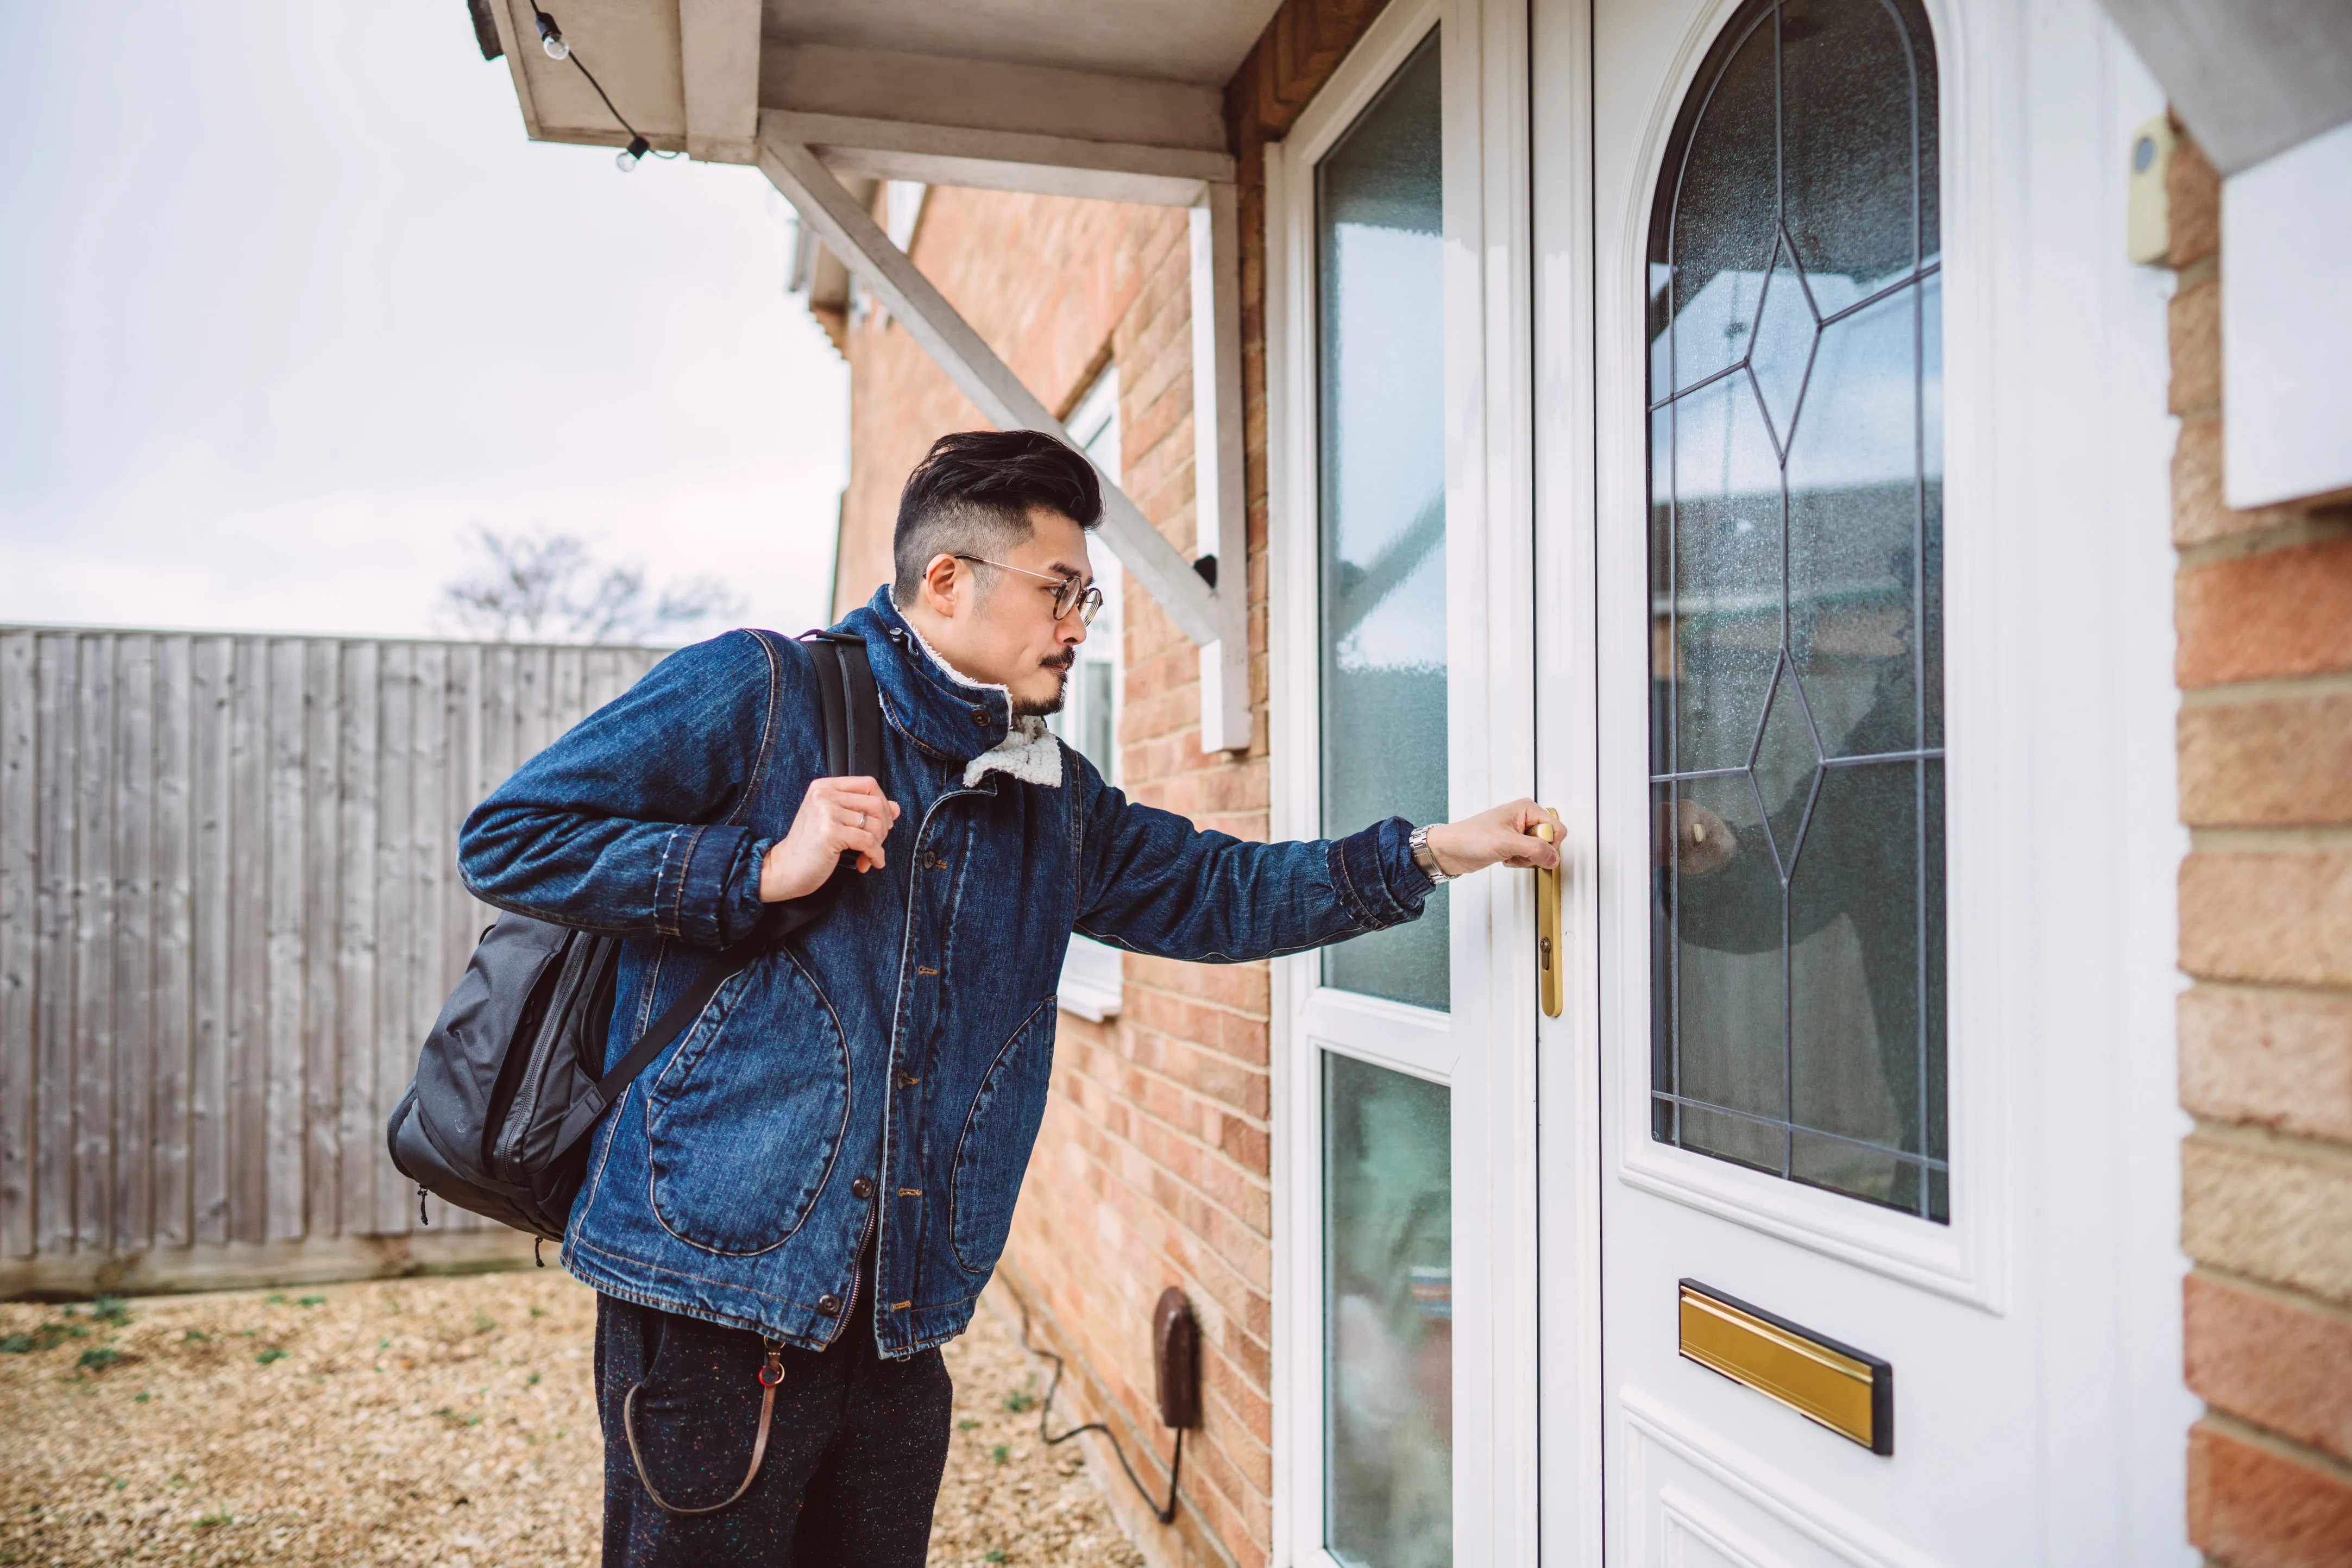 What to Do If You Get Locked Out of Your House